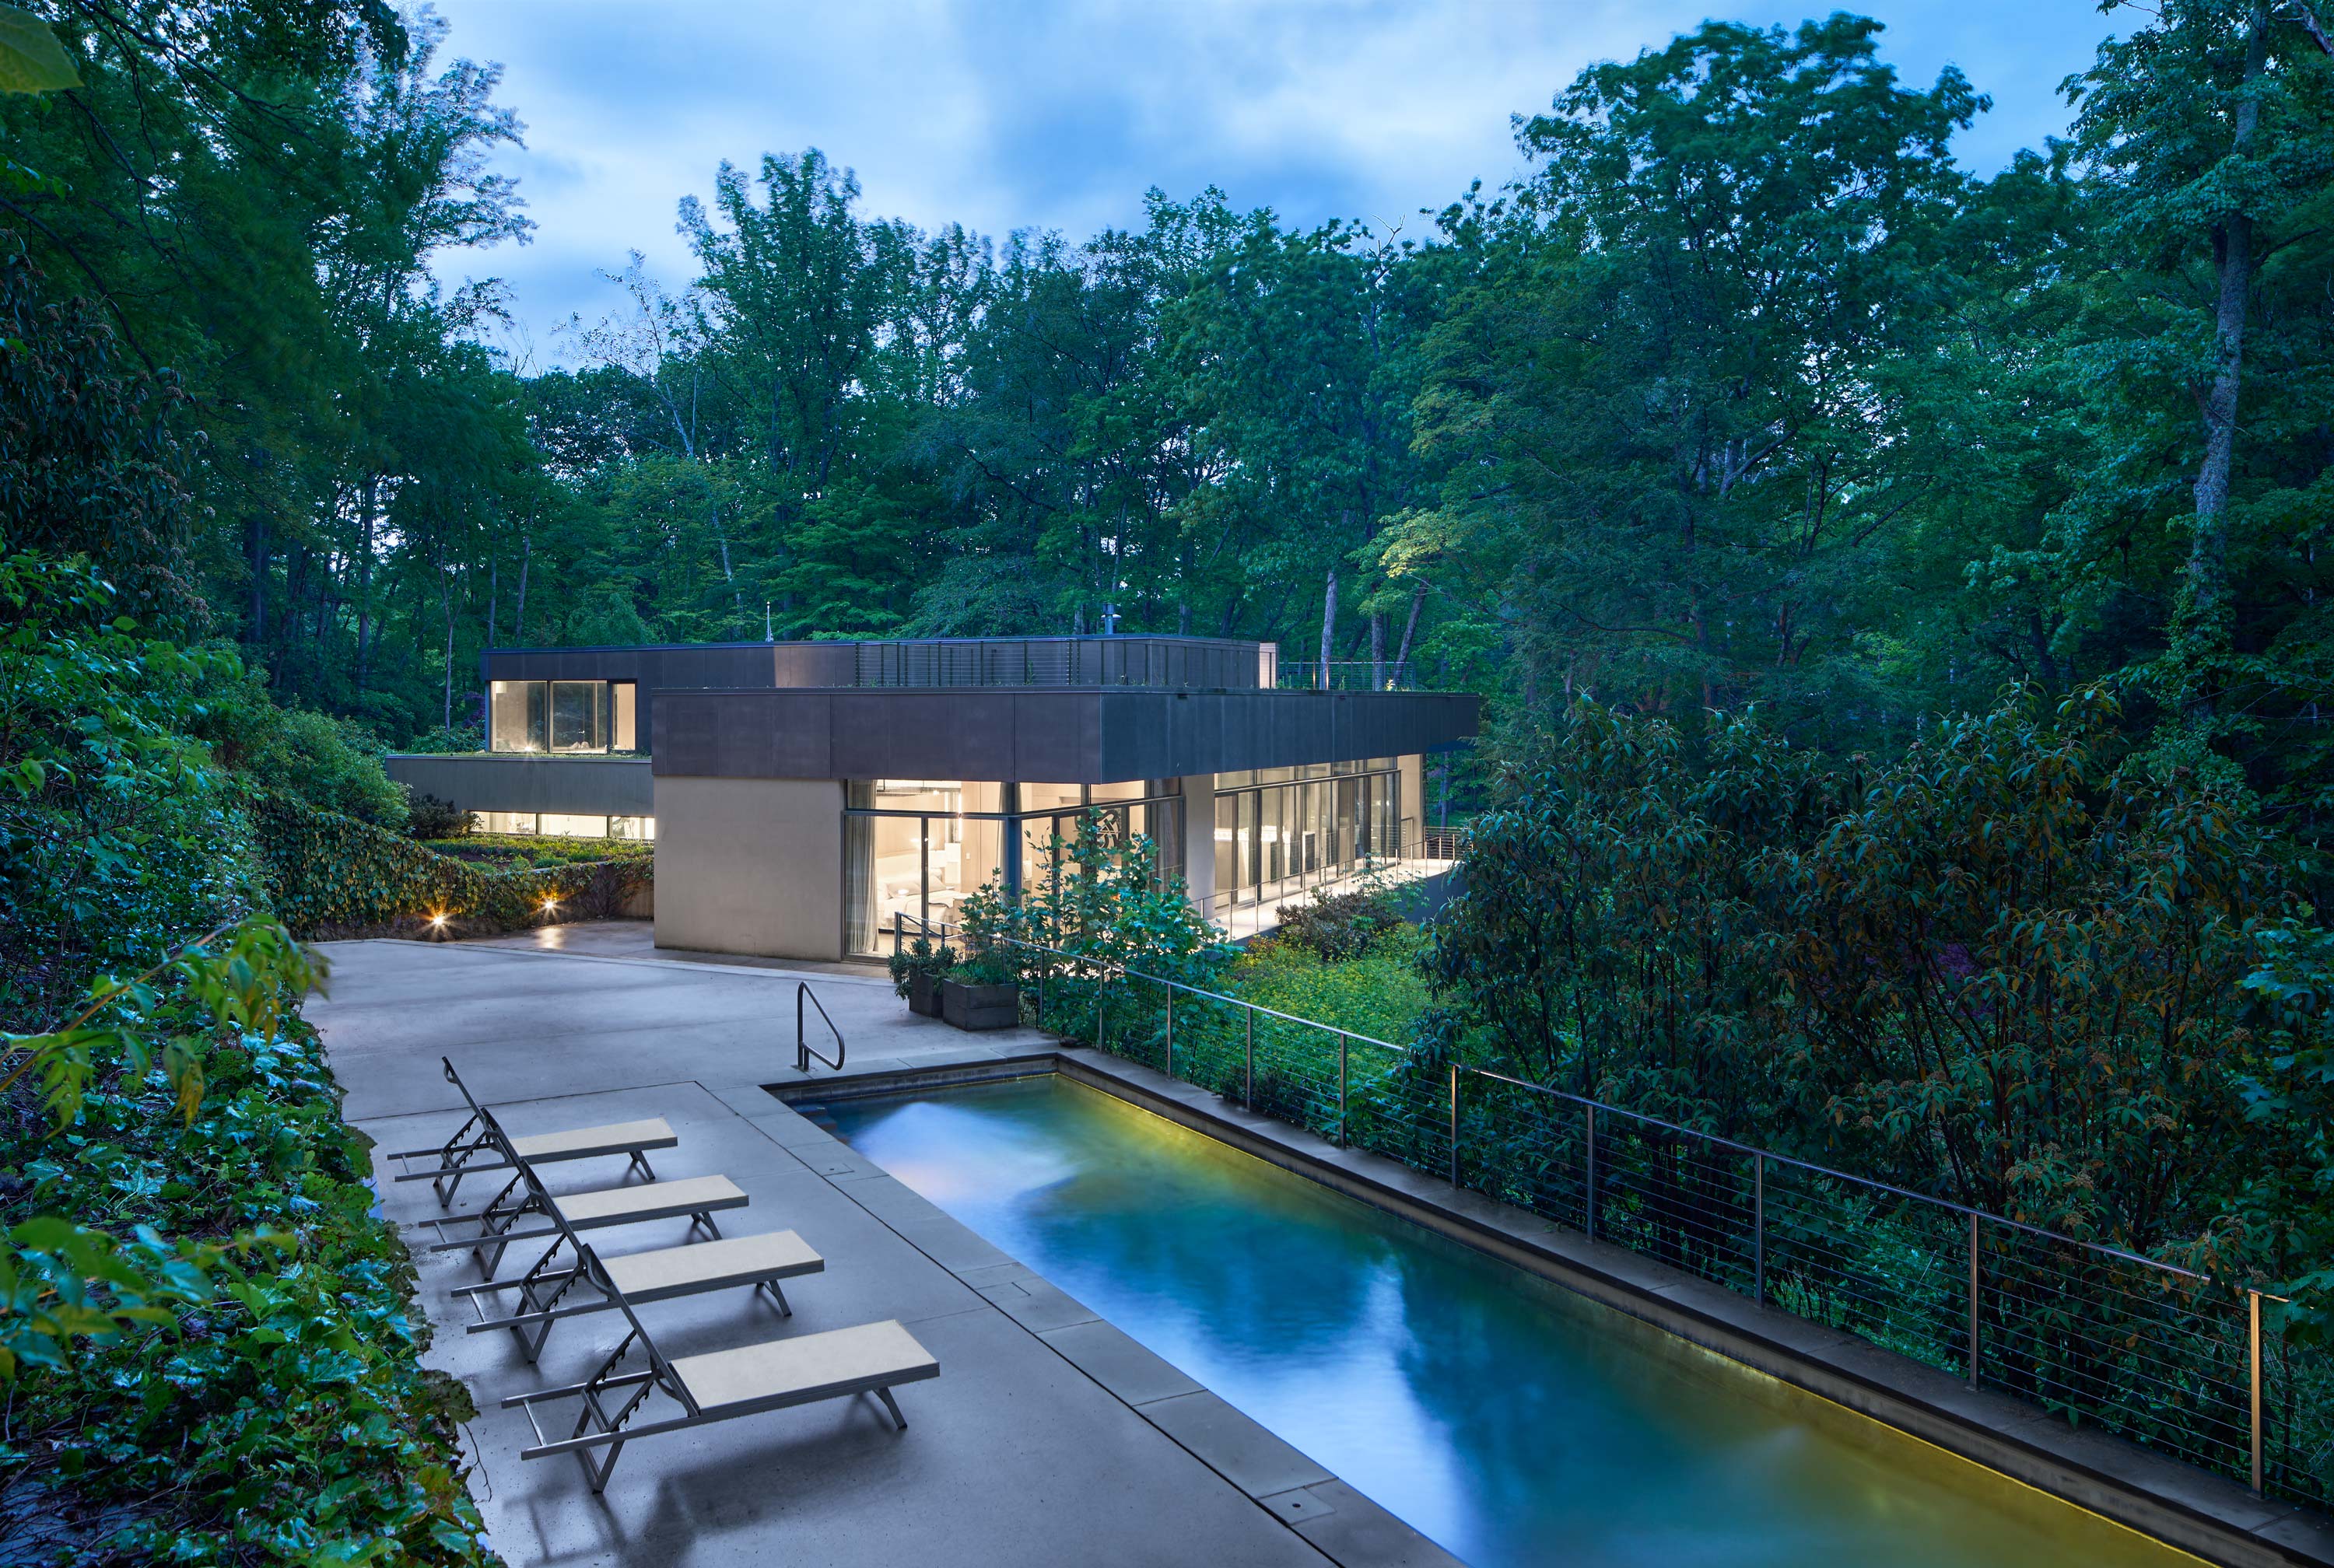 Exterior photo of Weston Residence by Specht Novak Architects. Shot by Jasper Lazor, featuring the concrete and glass home with roof gardens, and outside pool with lounging area.